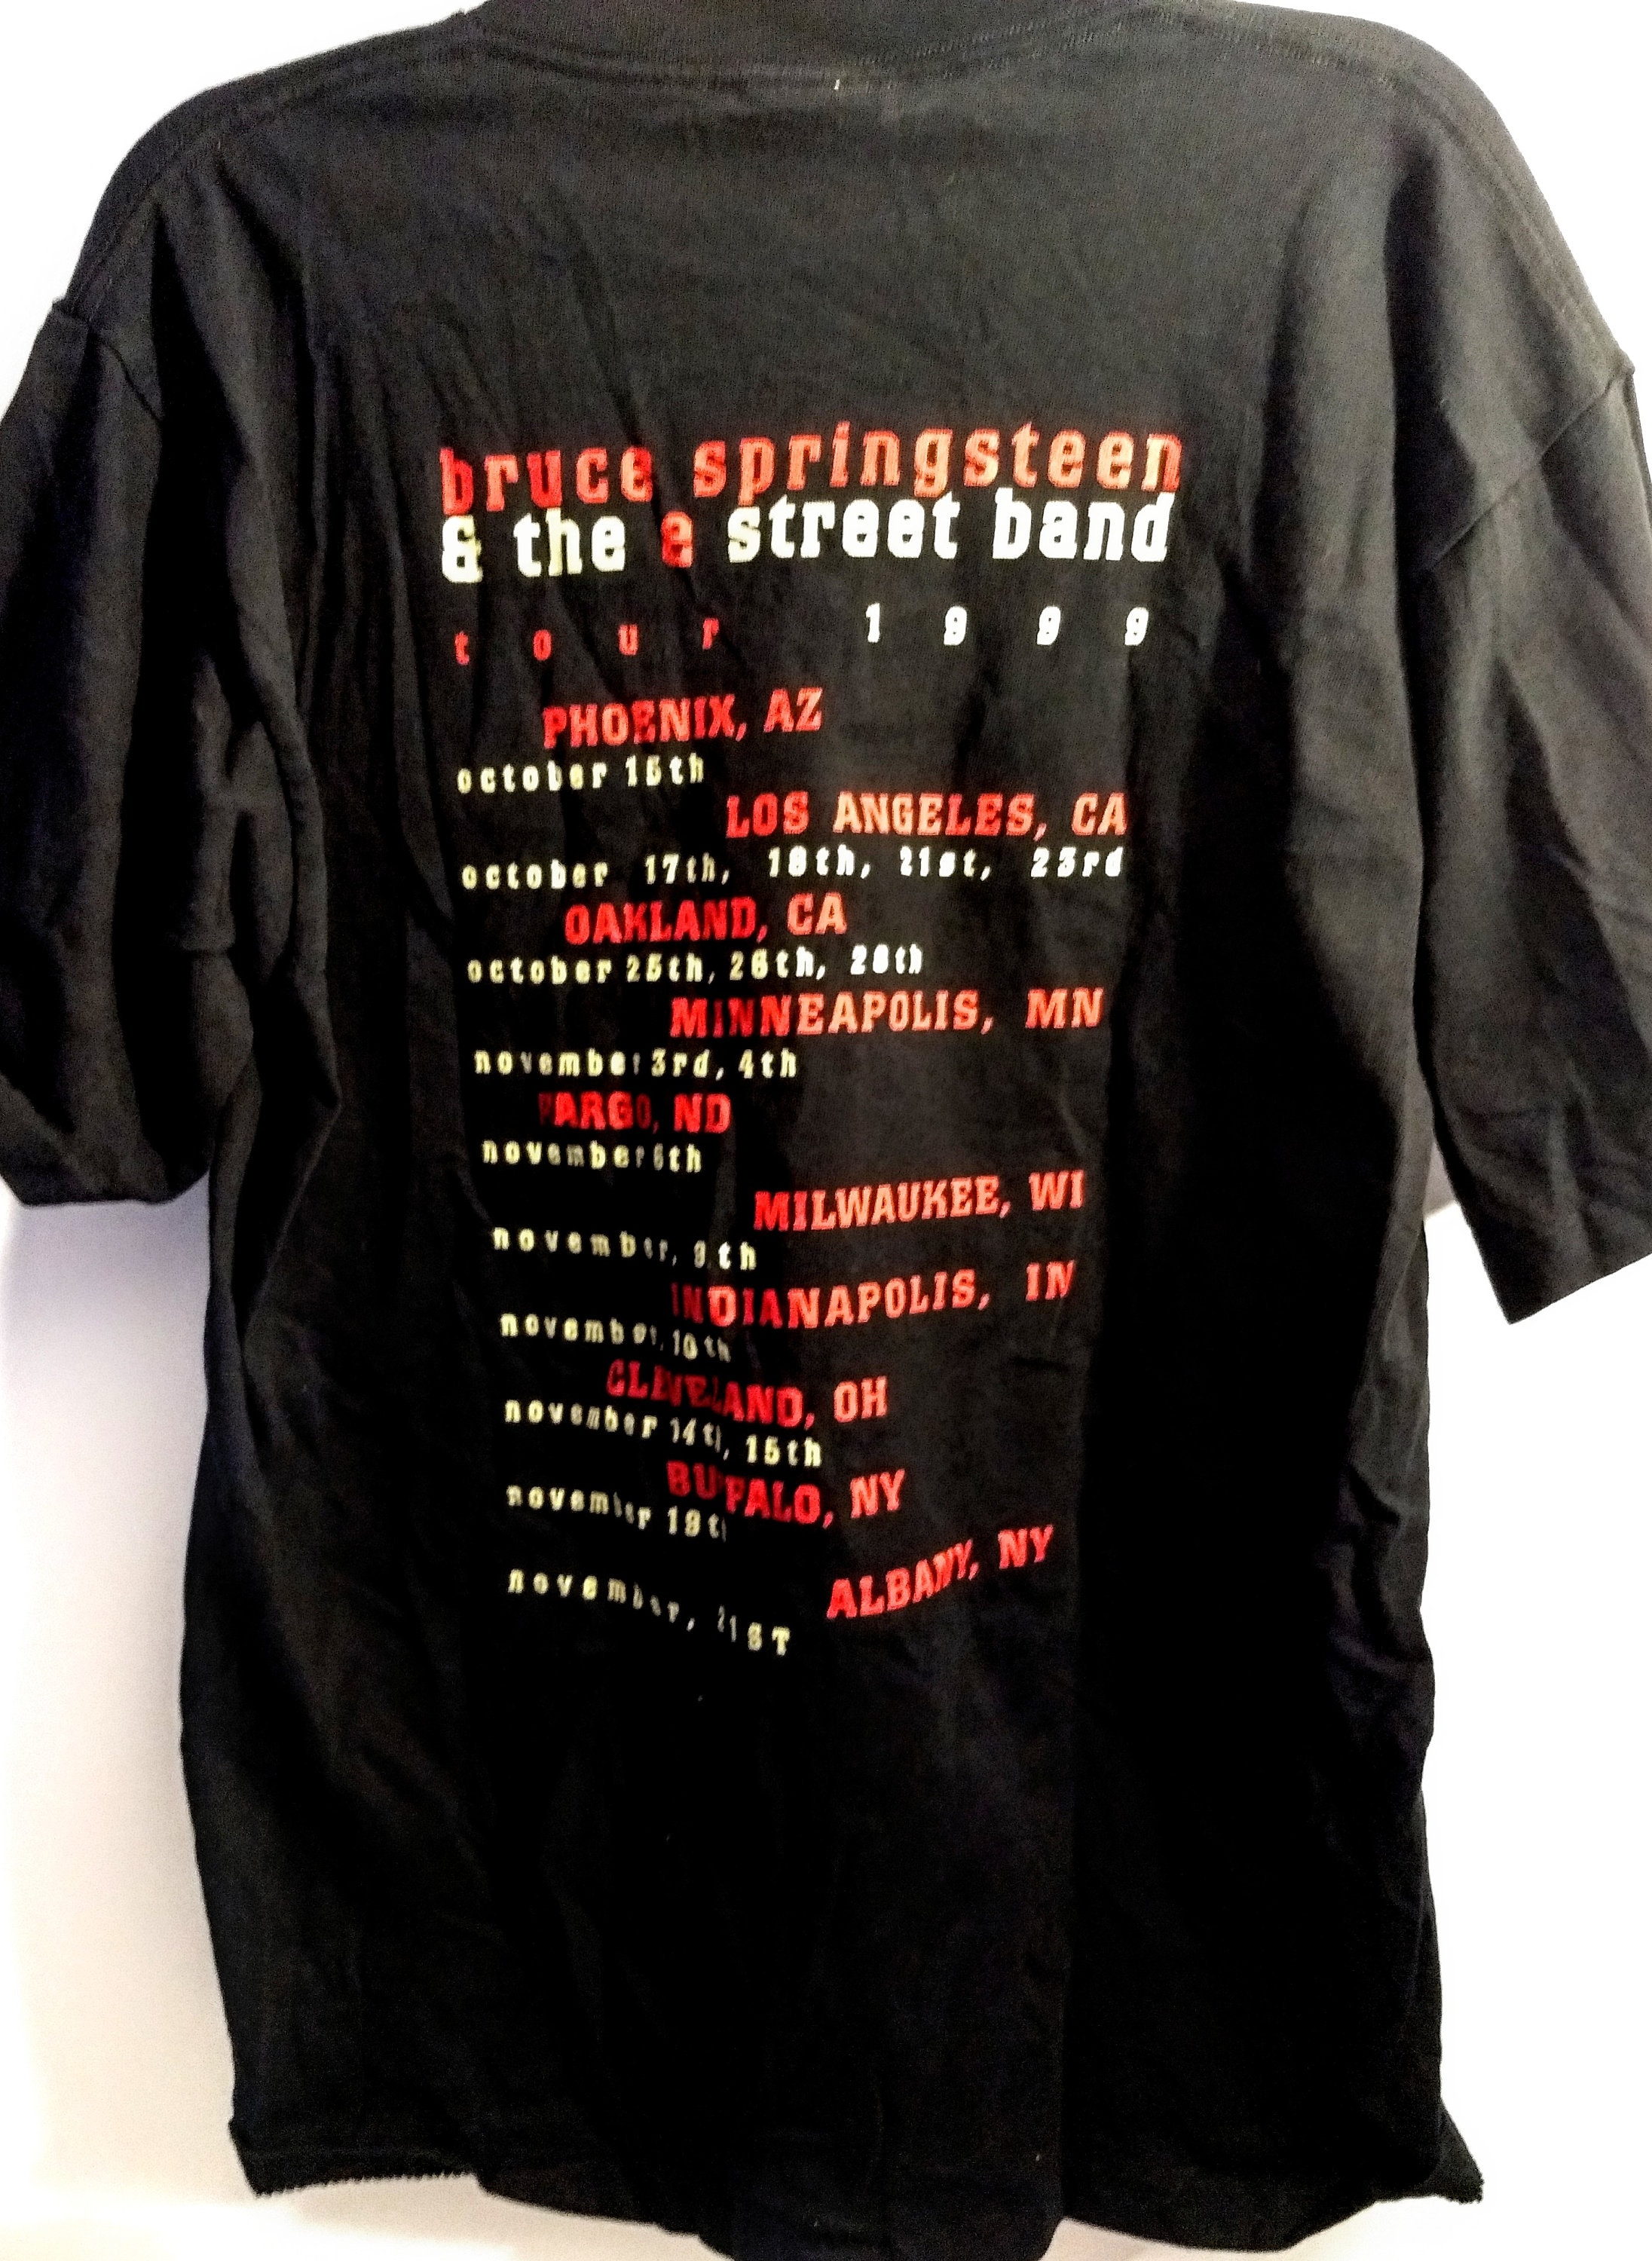 Bruce Springsteen, E Street Band, Concert T Shirt! Authentic Vintage 99